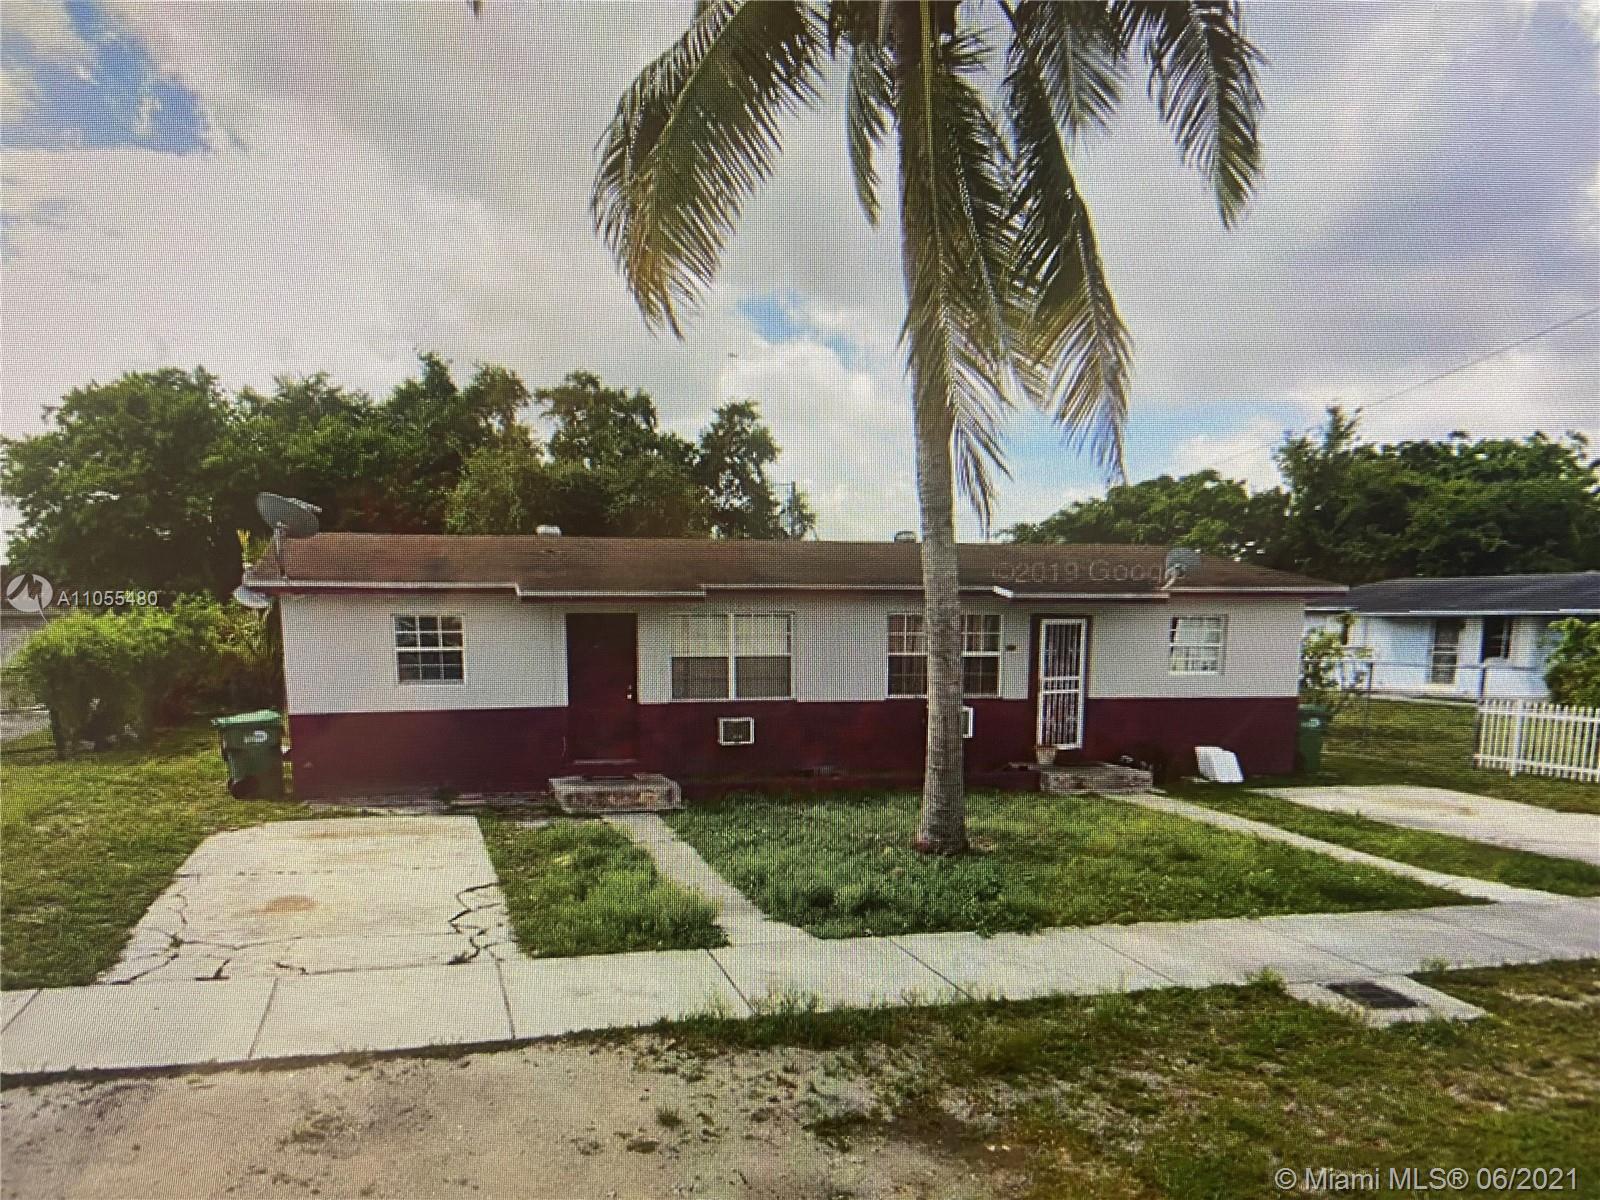 front view of house with a yard and palm trees